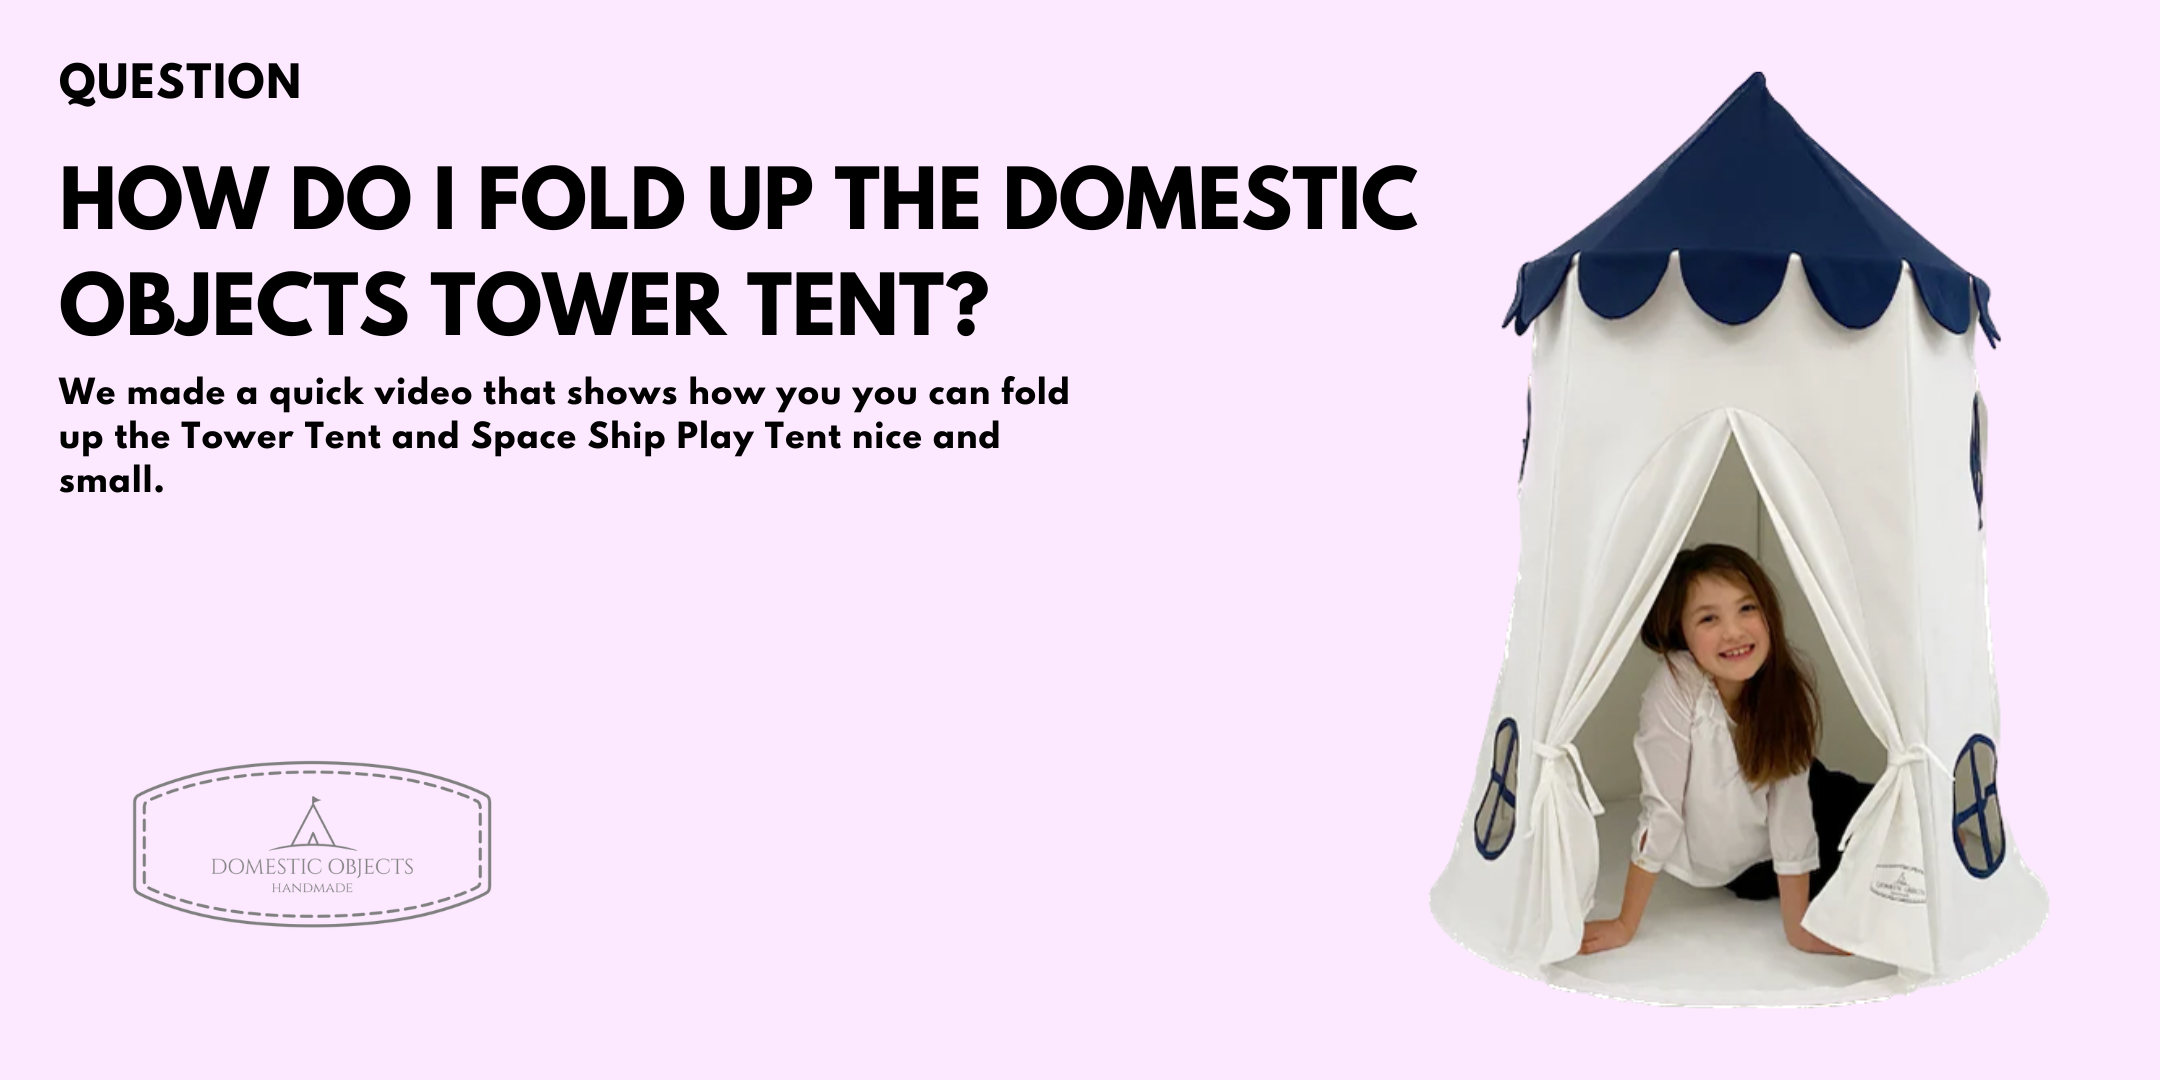 How do i Fold Up the Domestic Objects Tower Tent?